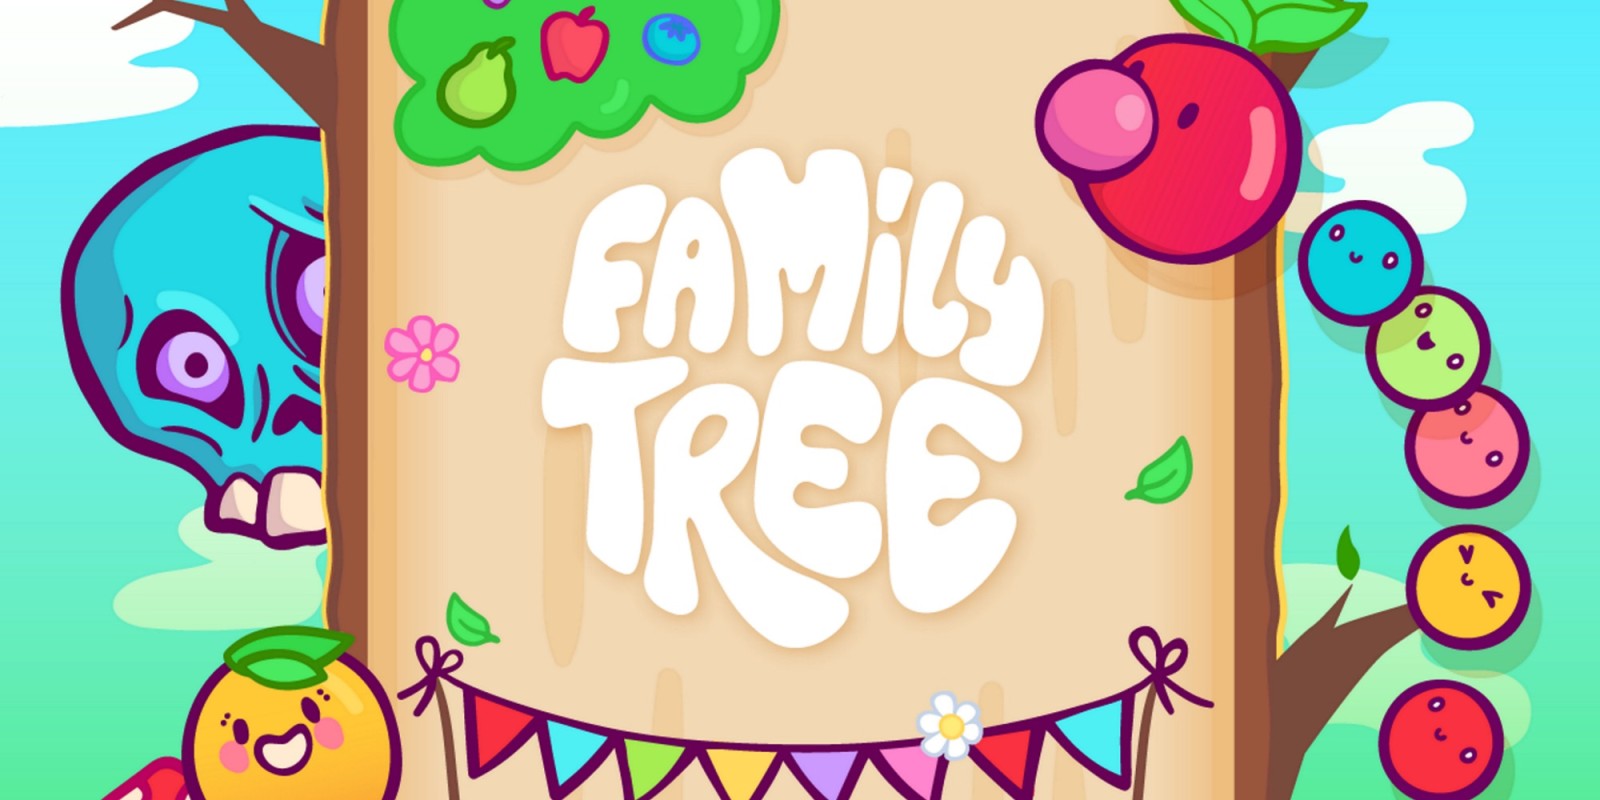 the first tree nintendo switch download free